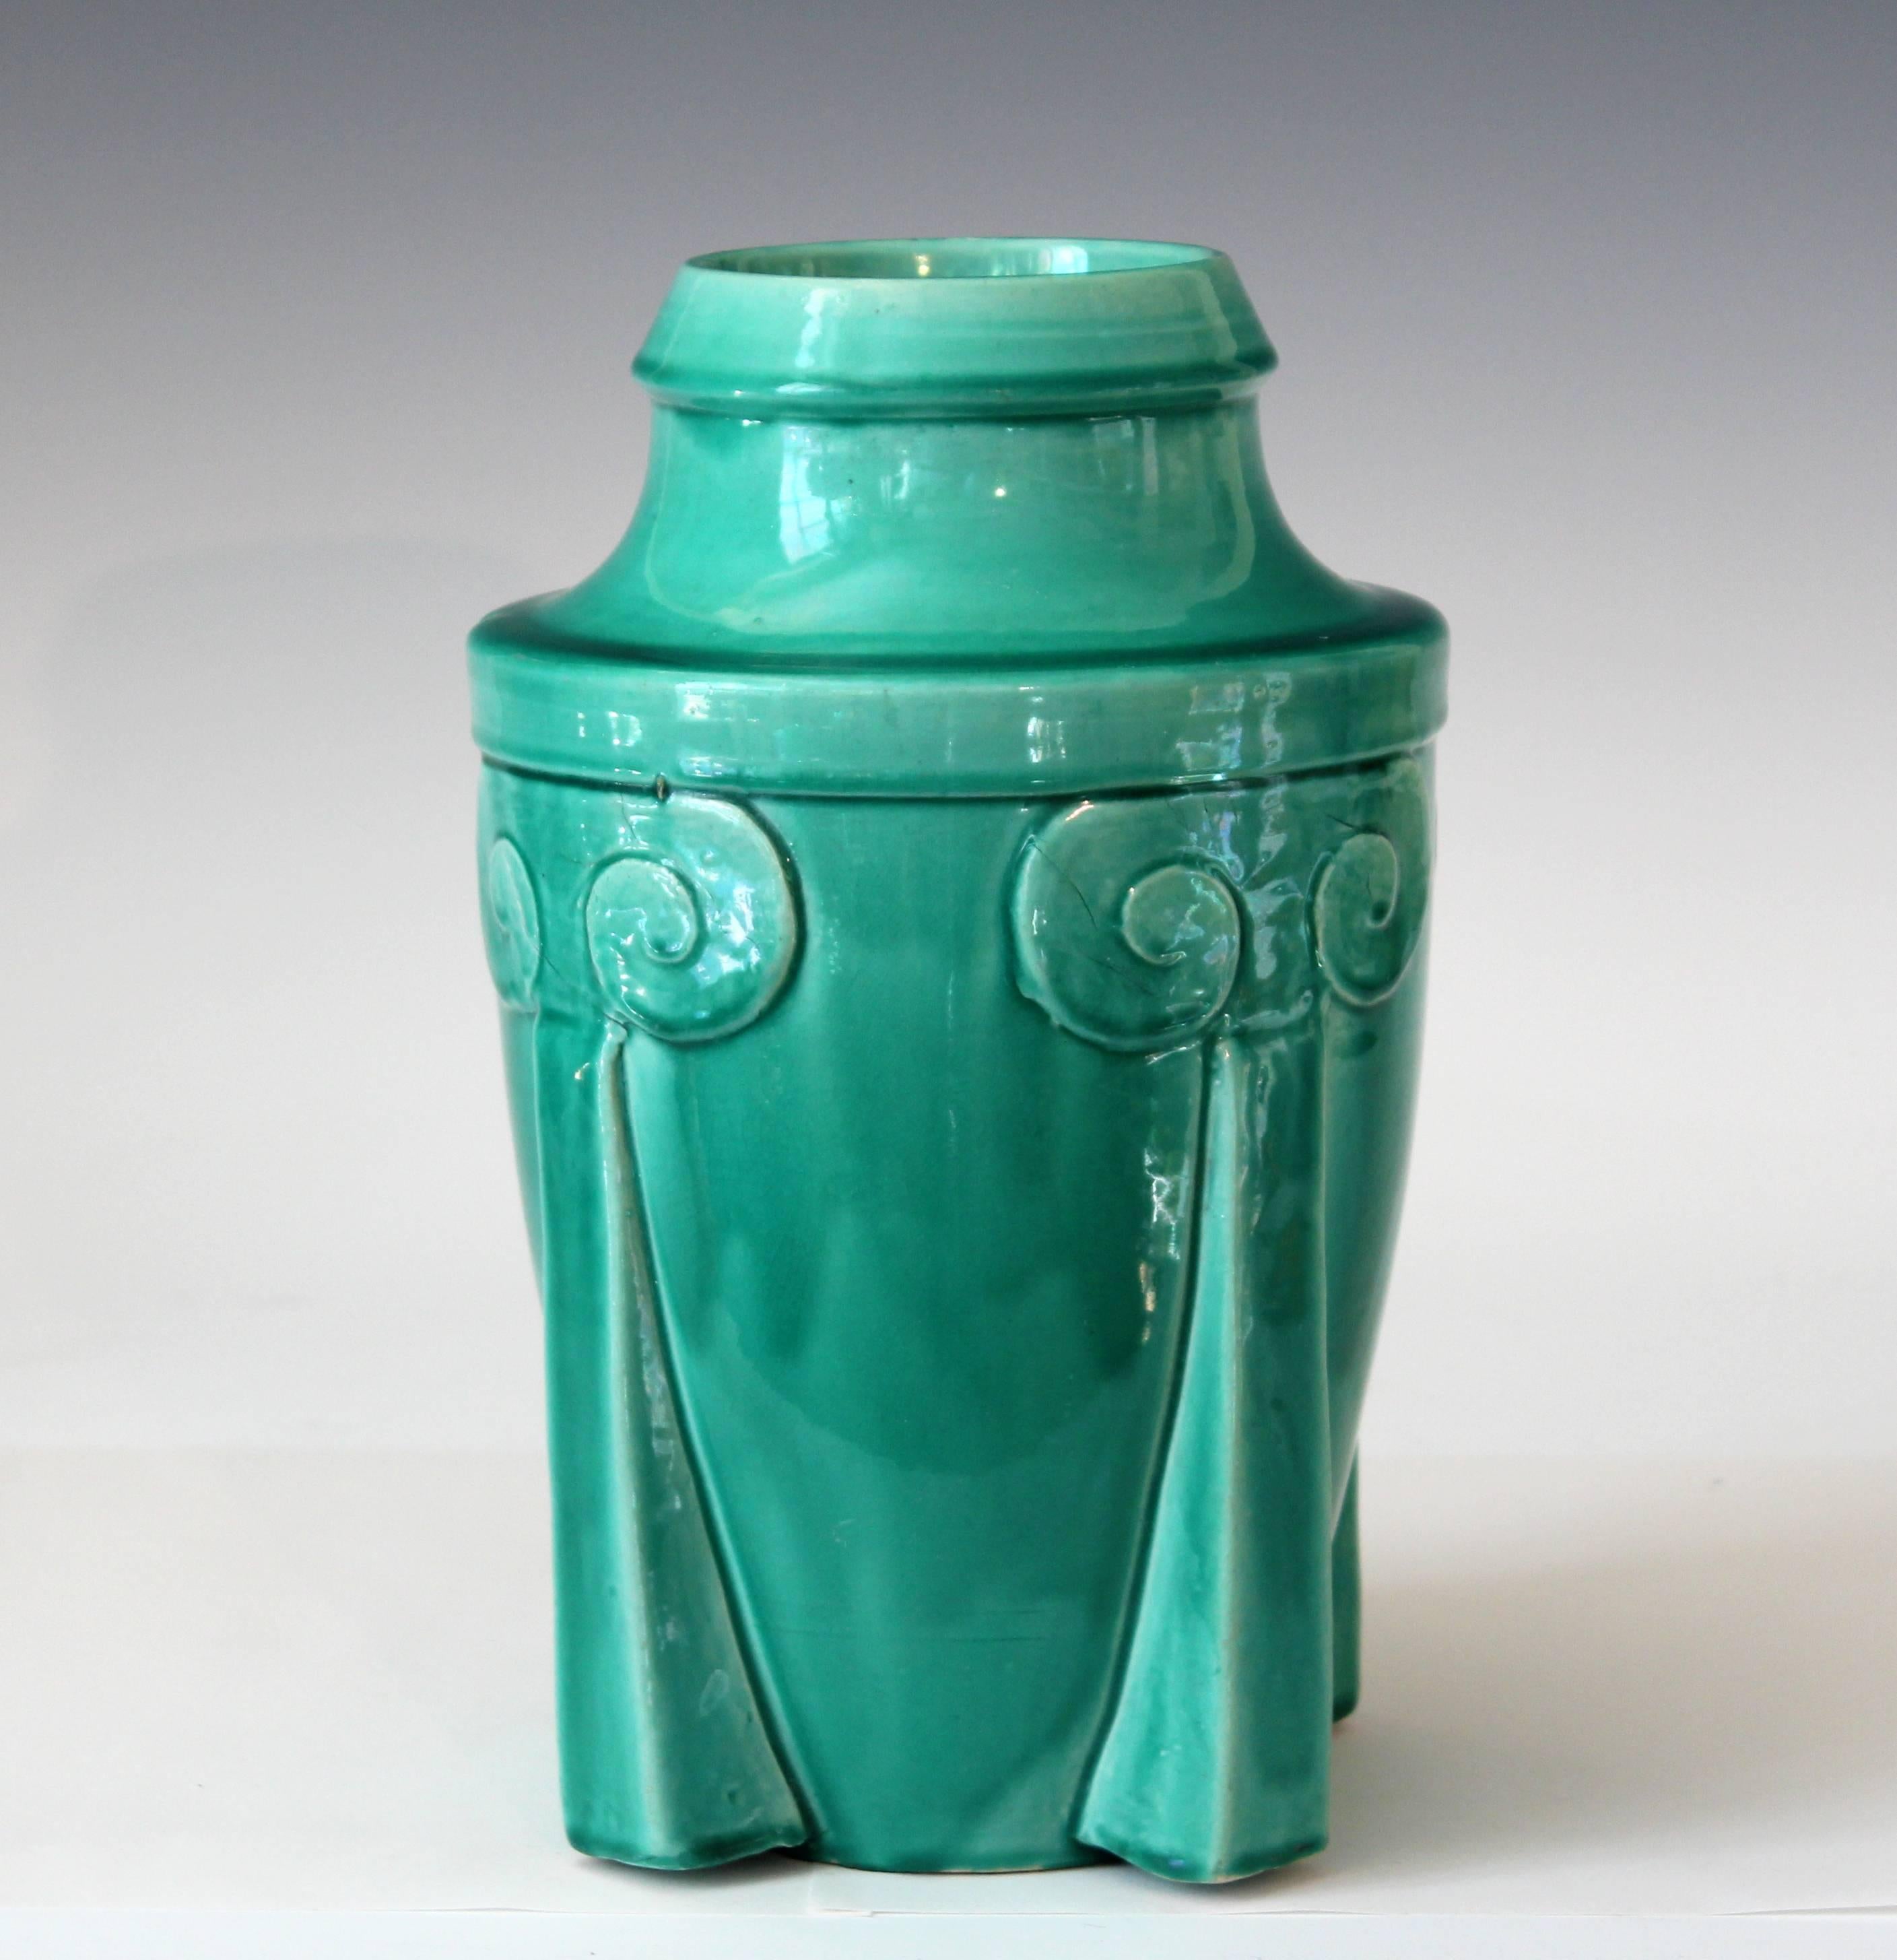 Vintage Awaji pottery vase in Art Deco rocket form with soothing turquoise green monochrome glaze, circa 1920. Measures: 10